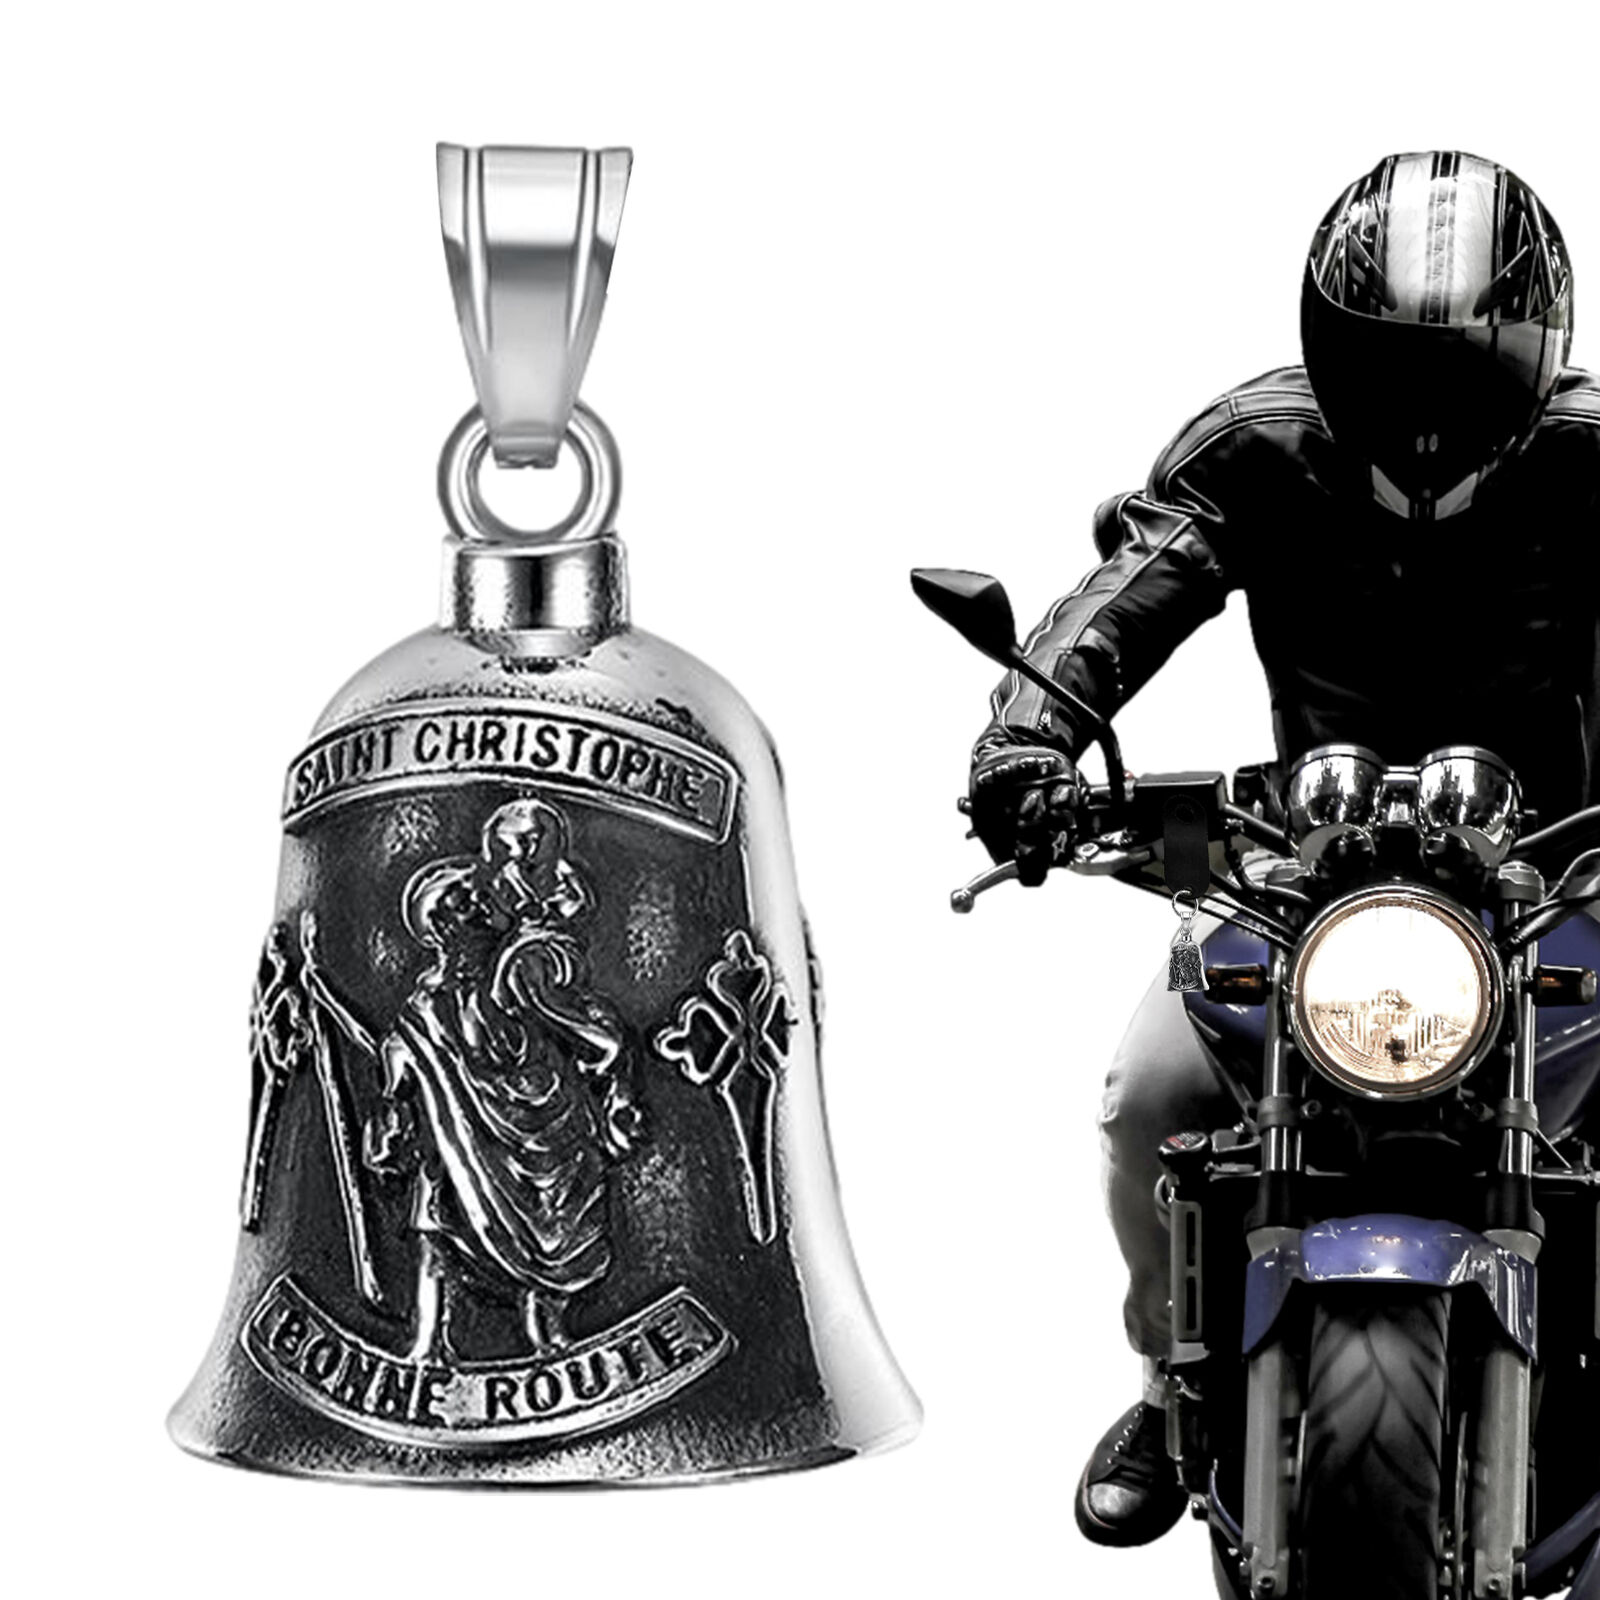 St. Christopher Guardian Bell Motorcycle Lucky Bell Stainless Steel Ride Bell